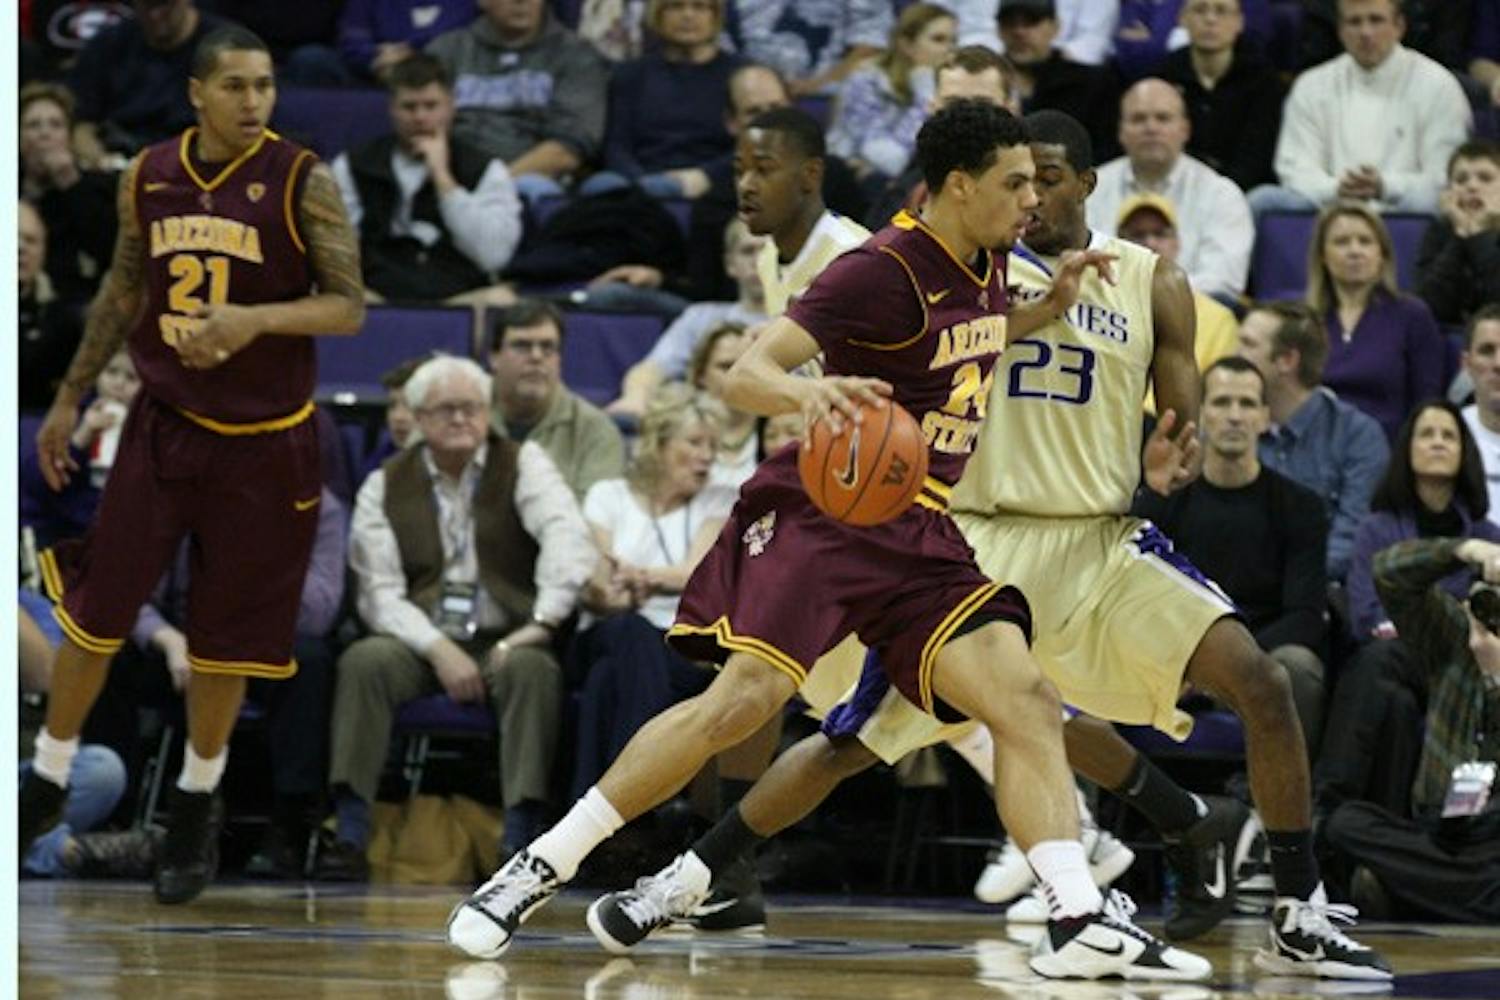 Failed Upset: ASU sophomore guard Trent Lockett attempts to drive past Washington redshirt freshman guard C.J. Wilcox during the Huskies’ 88-75 victory over the Sun Devils on Saturday. (Photo Courtesy of Luke Springer | The Daily of the University of Washington)